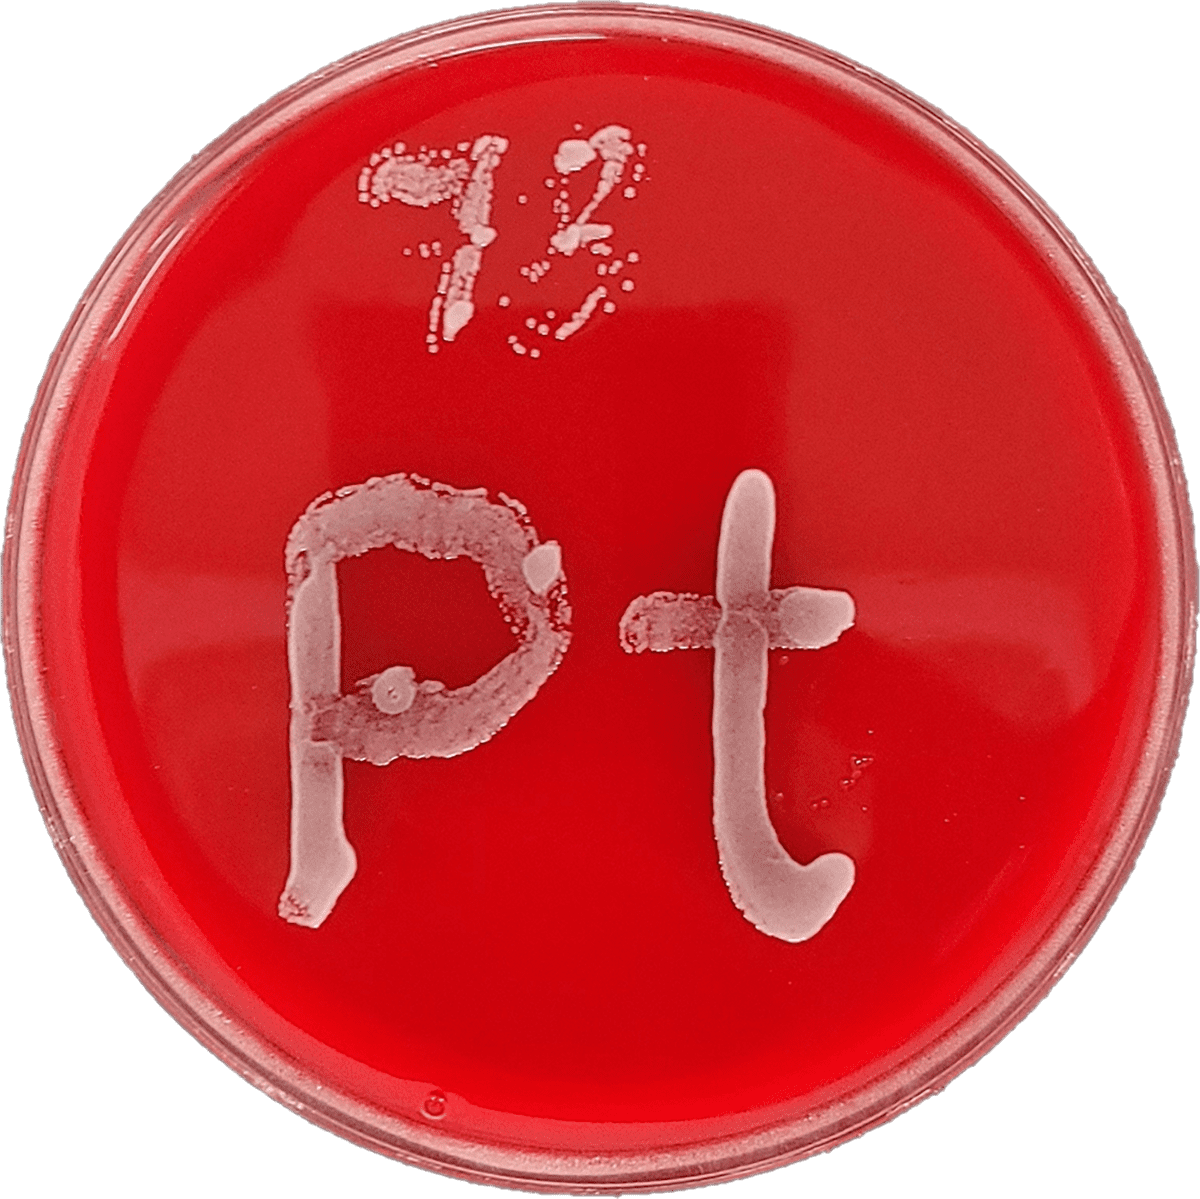 Petri dish with red agar on which a fungal strand in the shape of the element symbol for platinum (Pt) is growing.